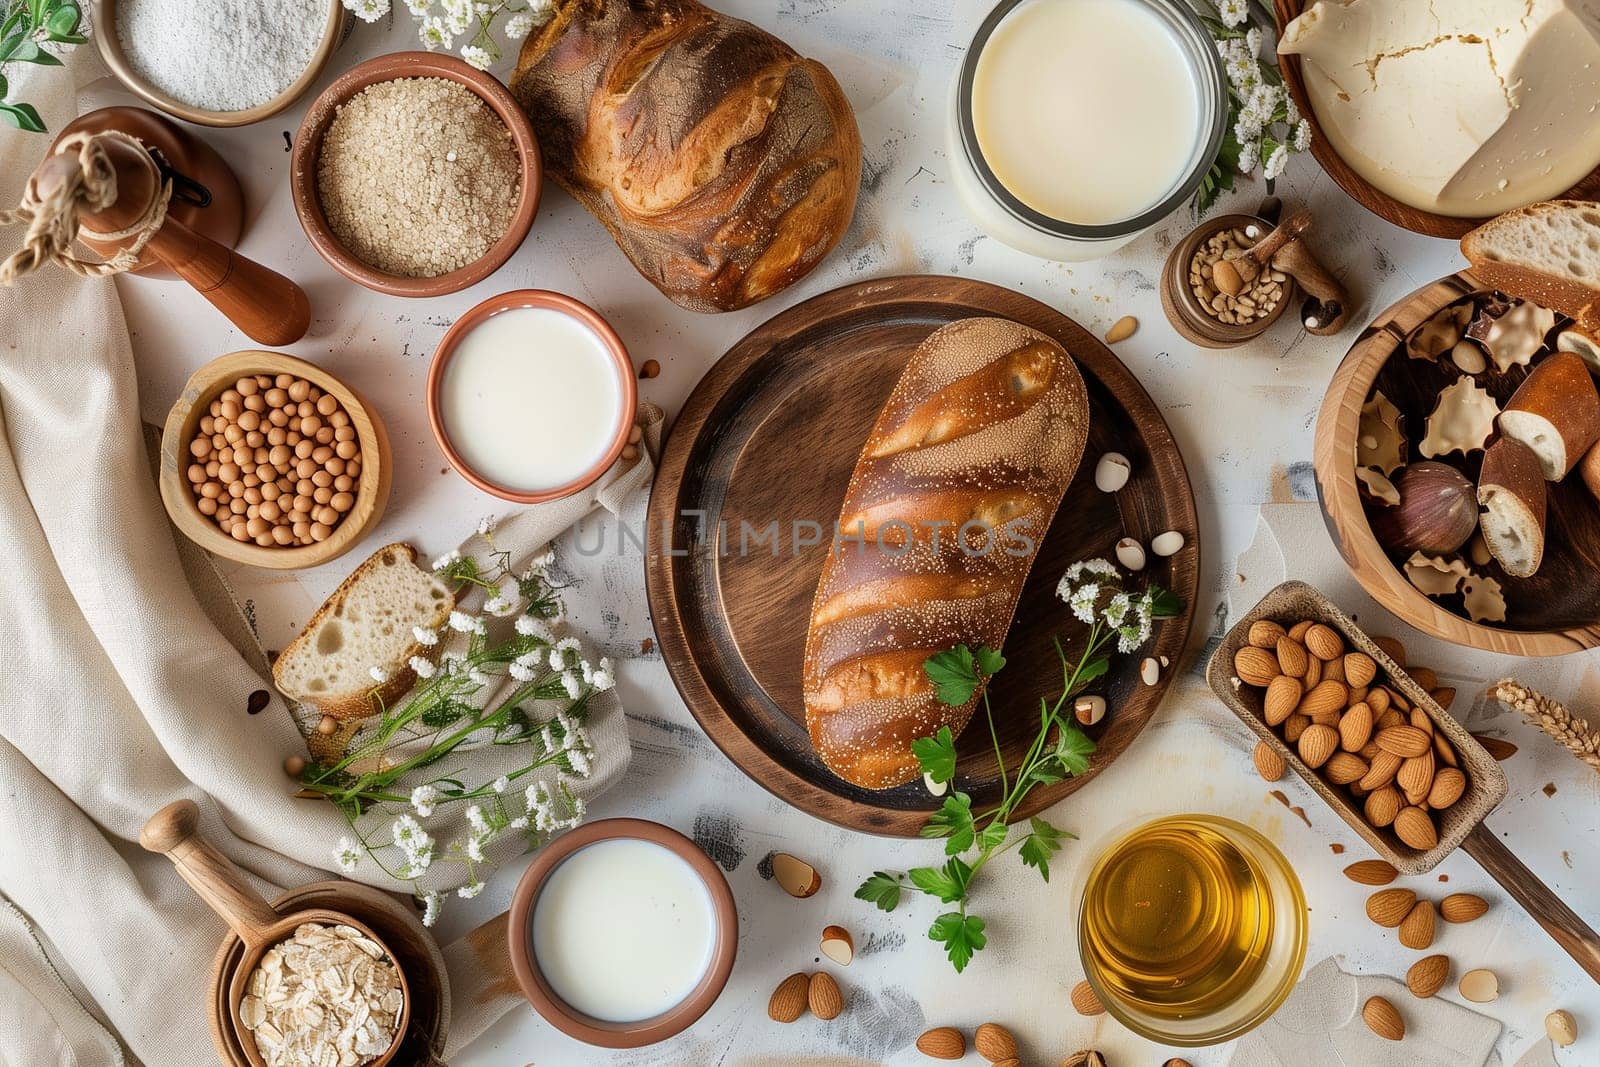 A table is adorned with a variety of foods including bread, milk, nuts, and more in preparation for the Shavuot celebration.